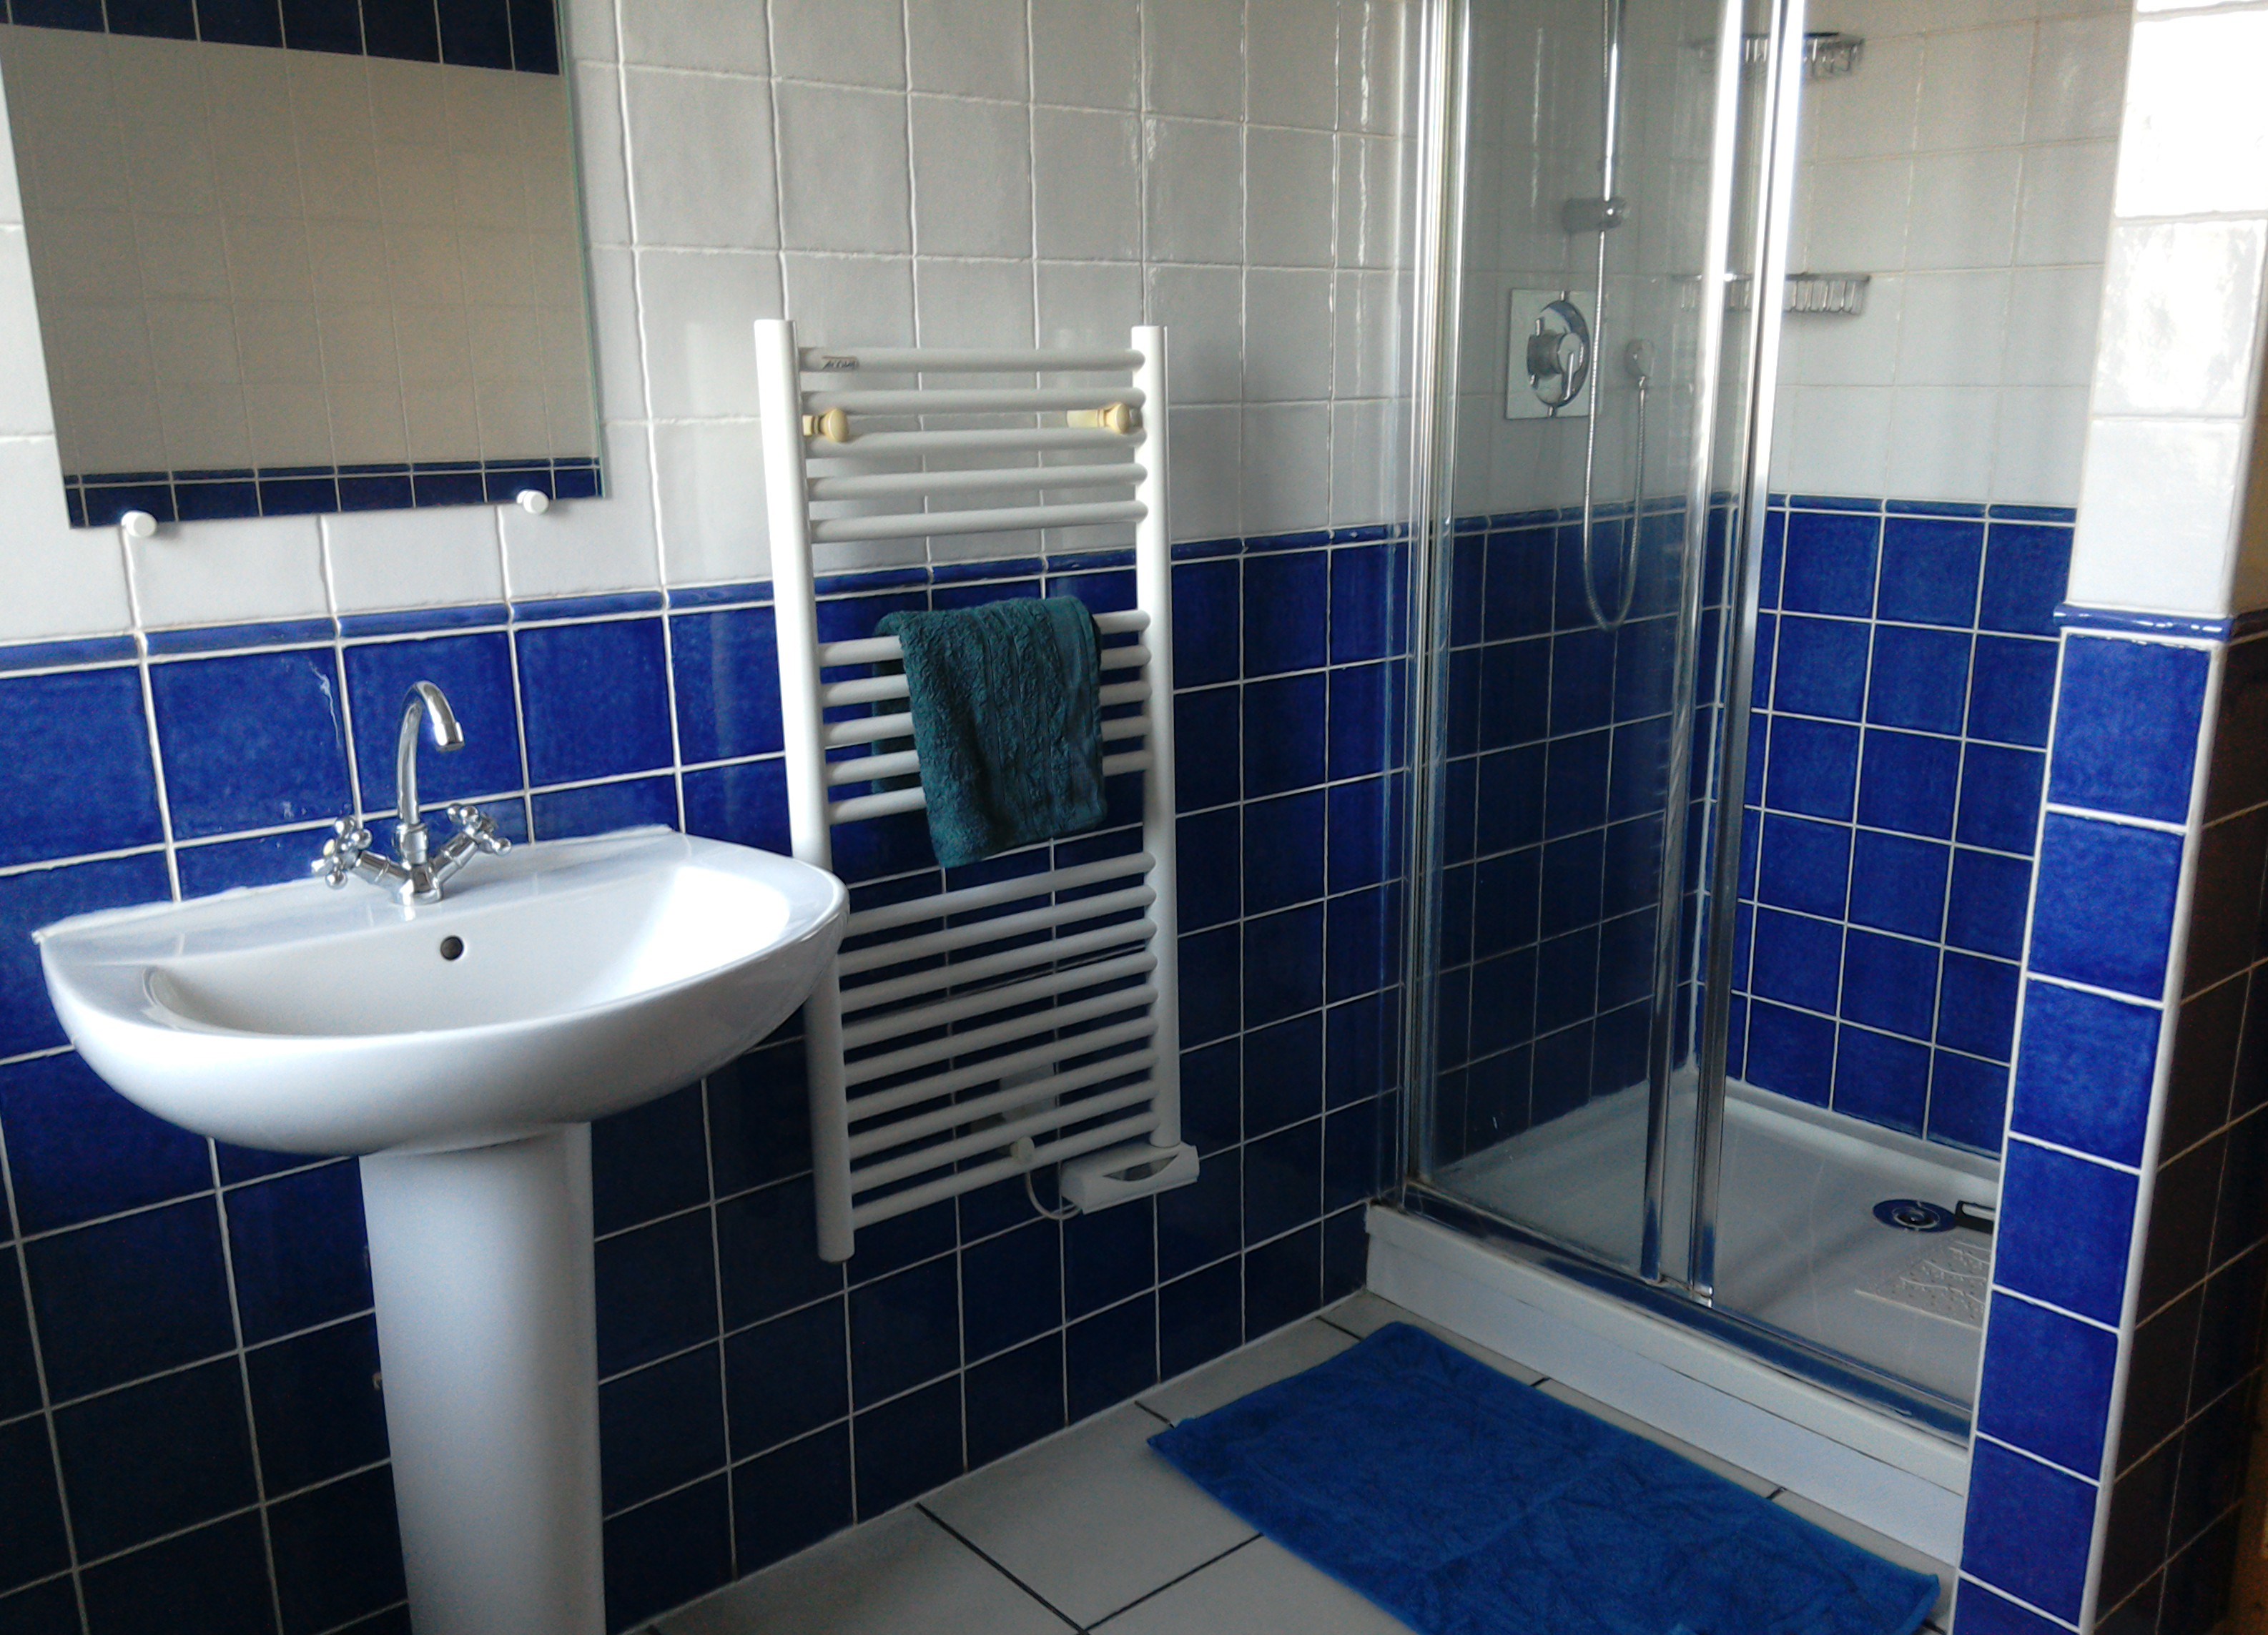 Bathroom with shower at Eco-Gites of Lenault, Normandy, France